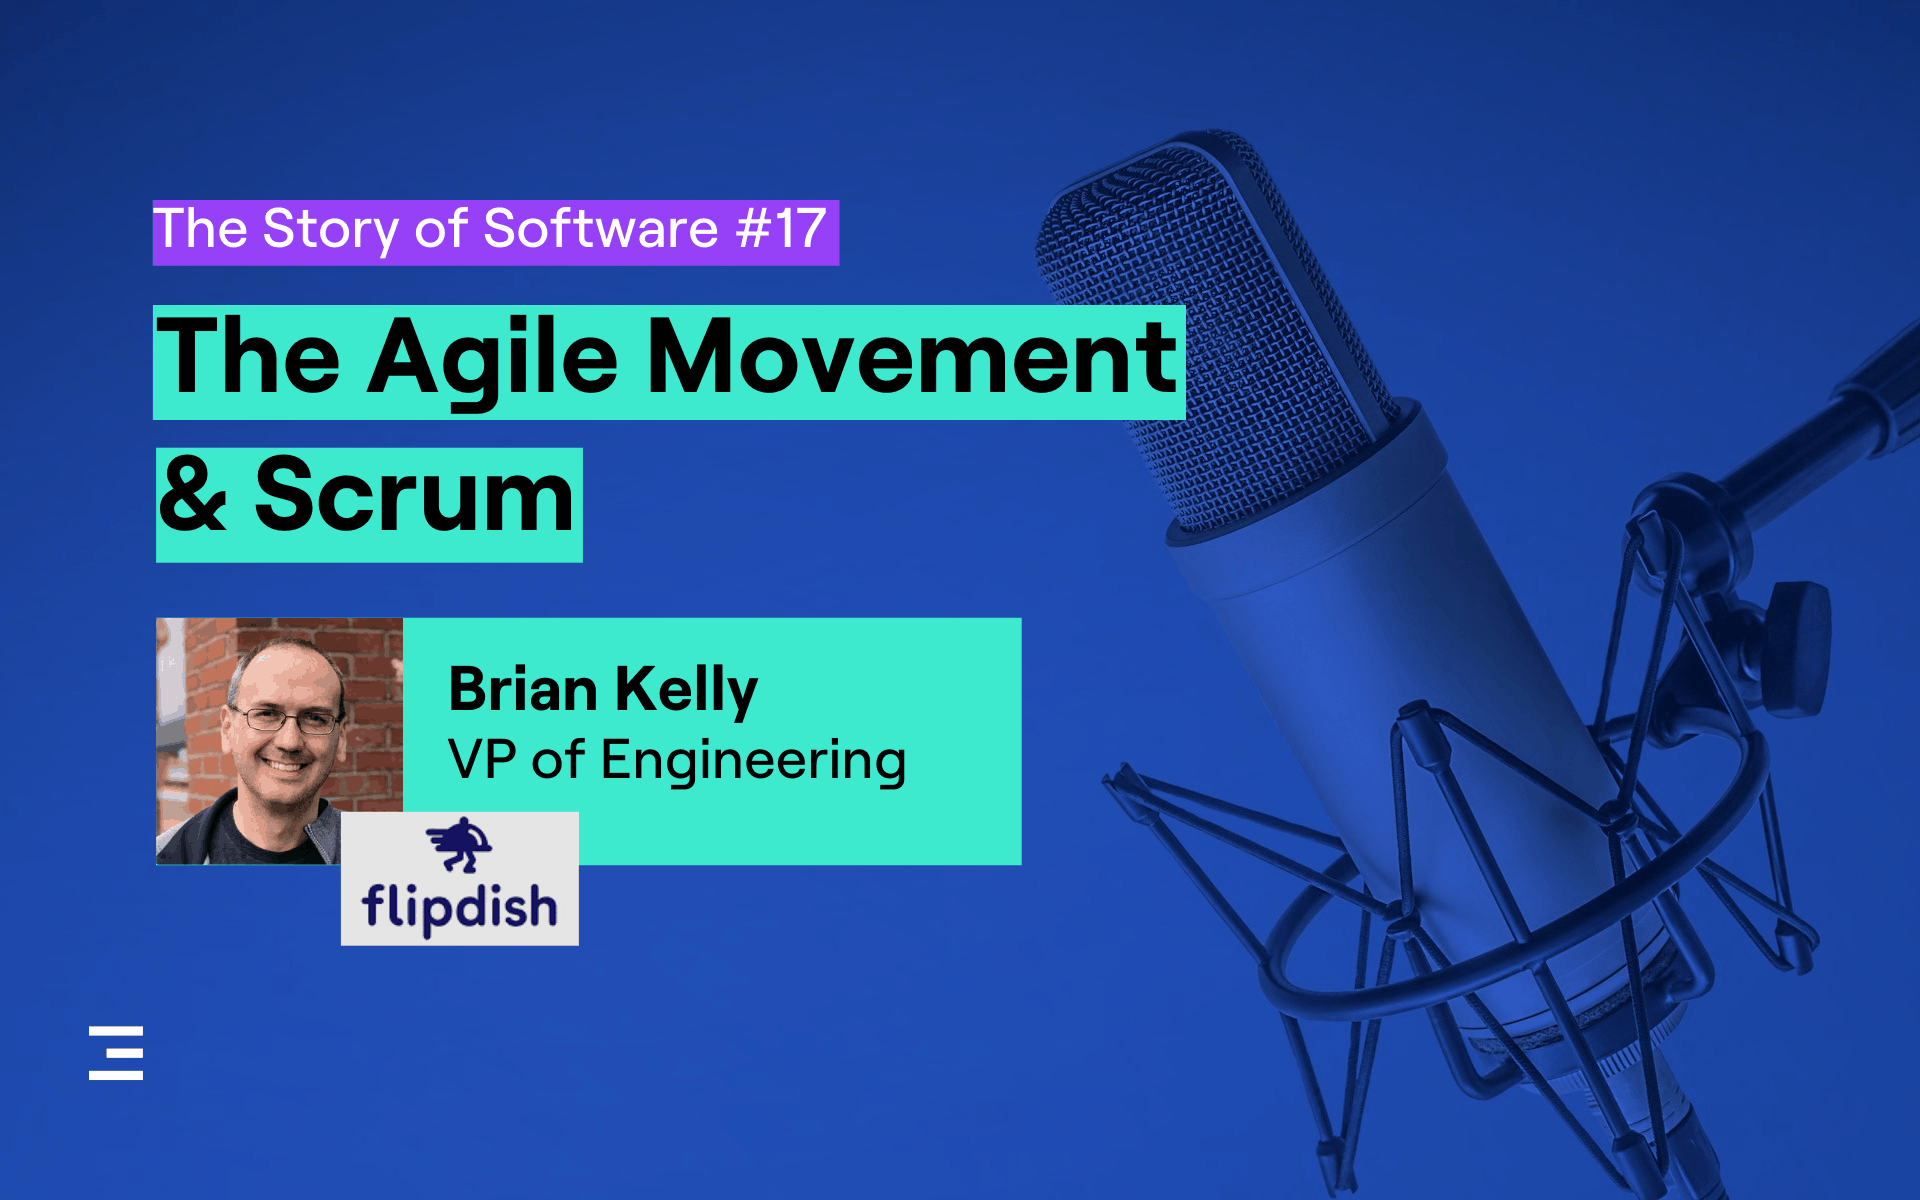 tech podcast story of software - the agile movement and scrum with Brian Kelly, VP of Engineering at Flipdish